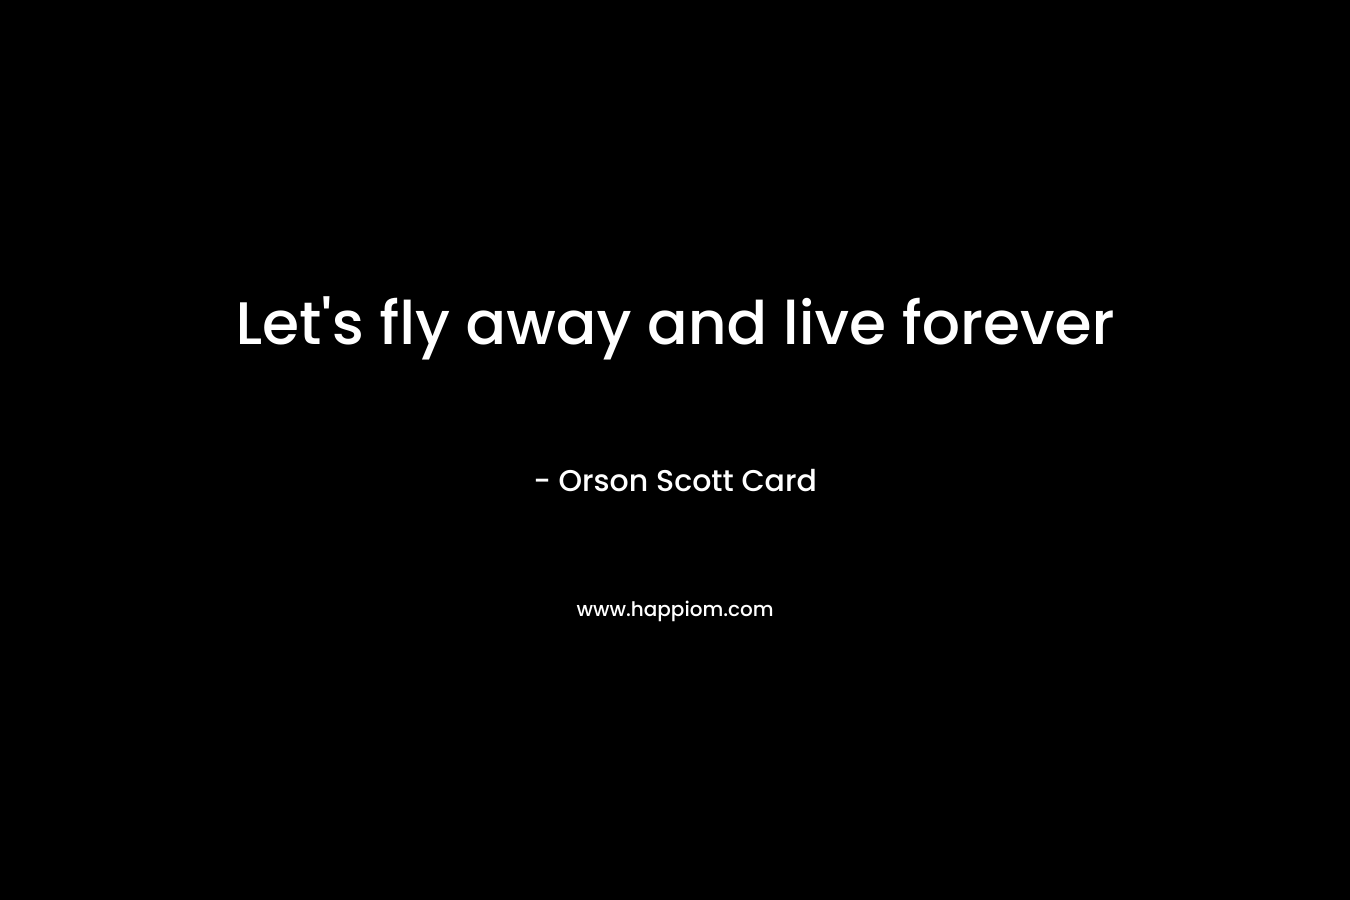 Let's fly away and live forever